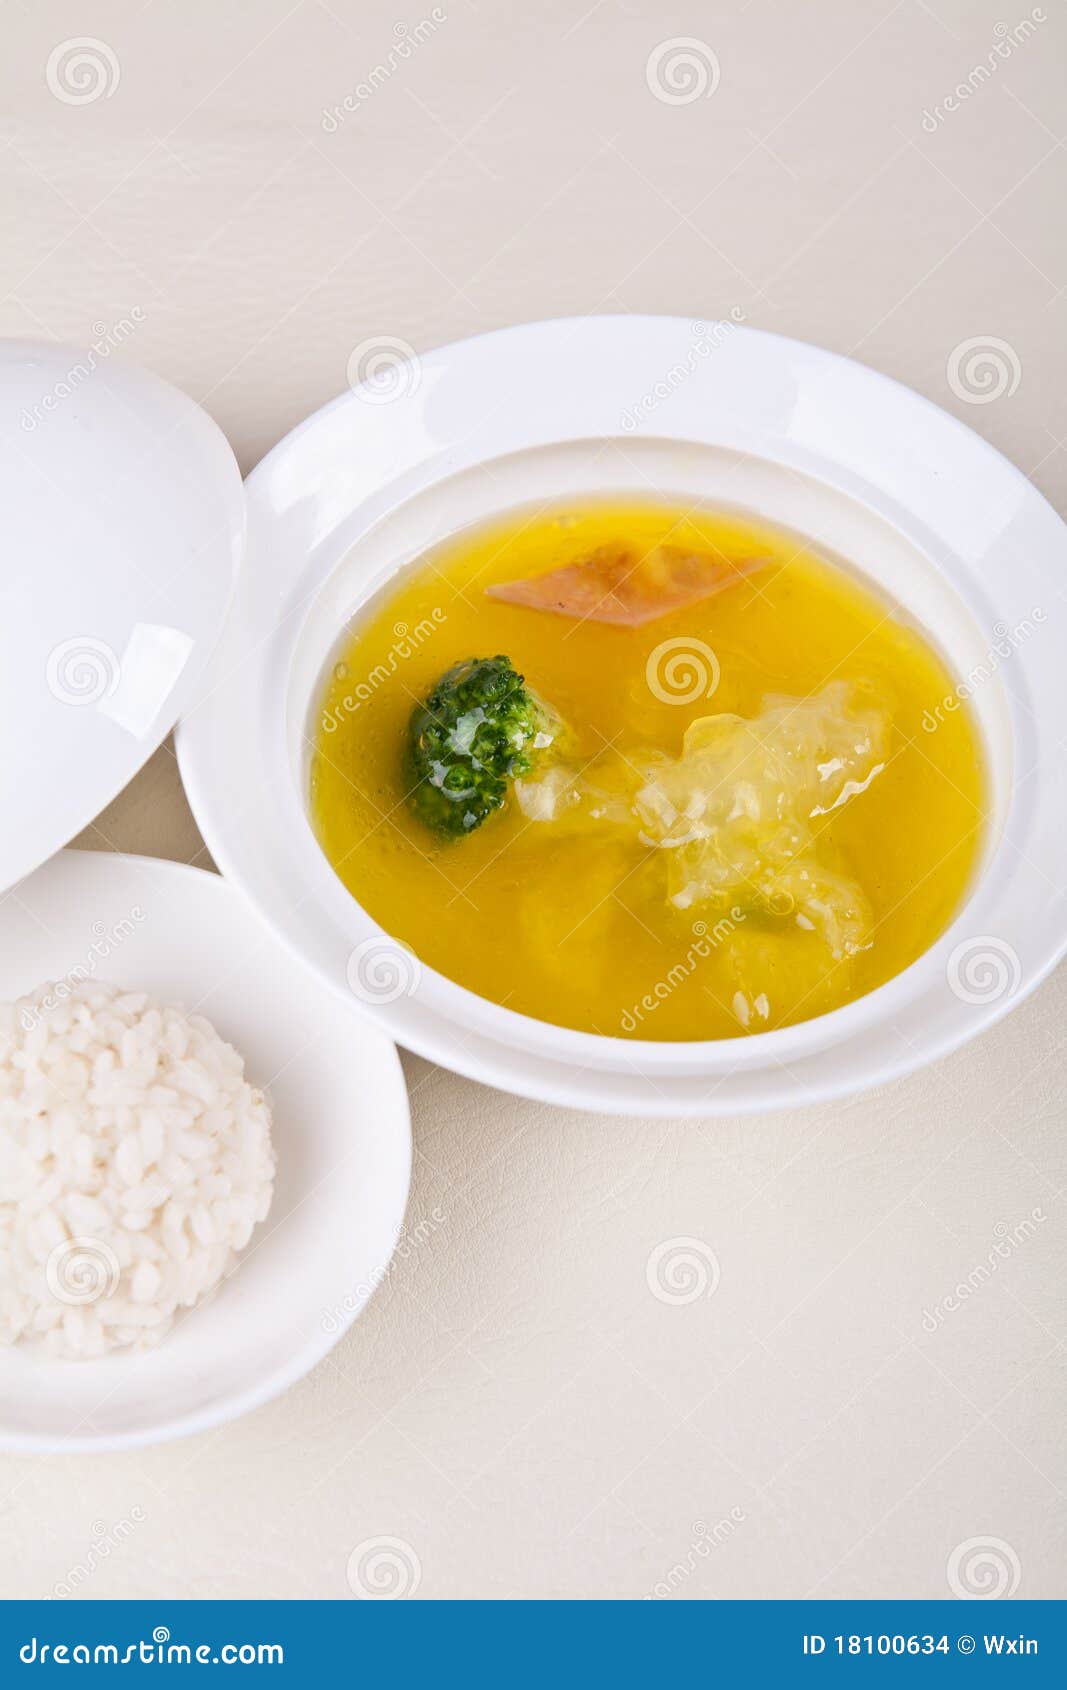 Shark fin soup stock photo. Image of healthy, delicious - 18100634